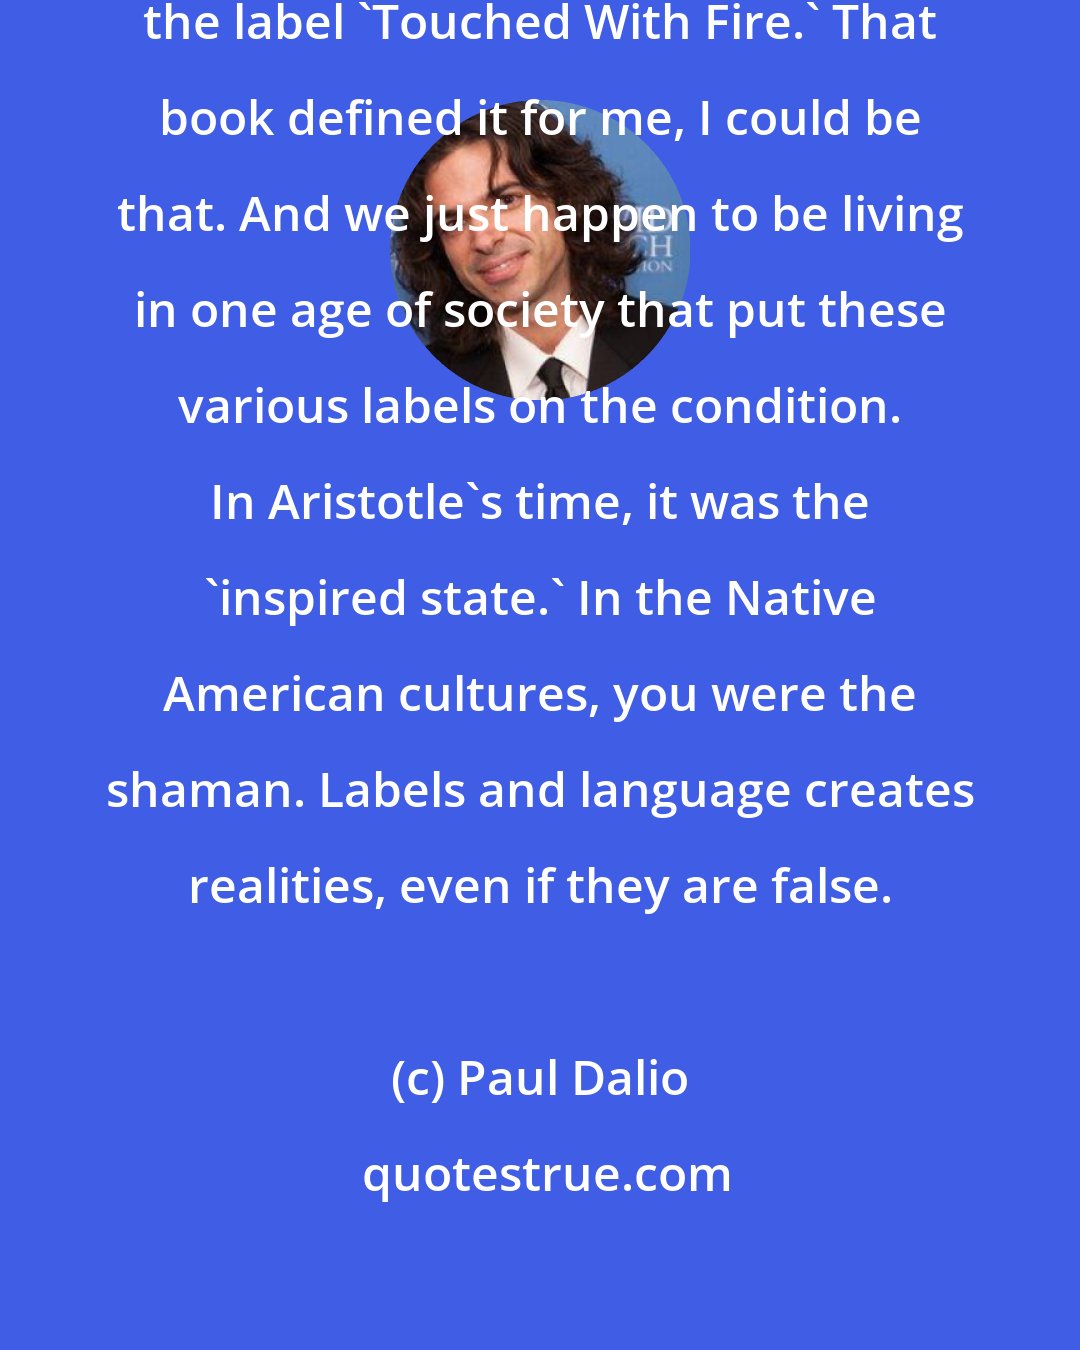 Paul Dalio: That is the beauty when I discovered the label 'Touched With Fire.' That book defined it for me, I could be that. And we just happen to be living in one age of society that put these various labels on the condition. In Aristotle's time, it was the 'inspired state.' In the Native American cultures, you were the shaman. Labels and language creates realities, even if they are false.